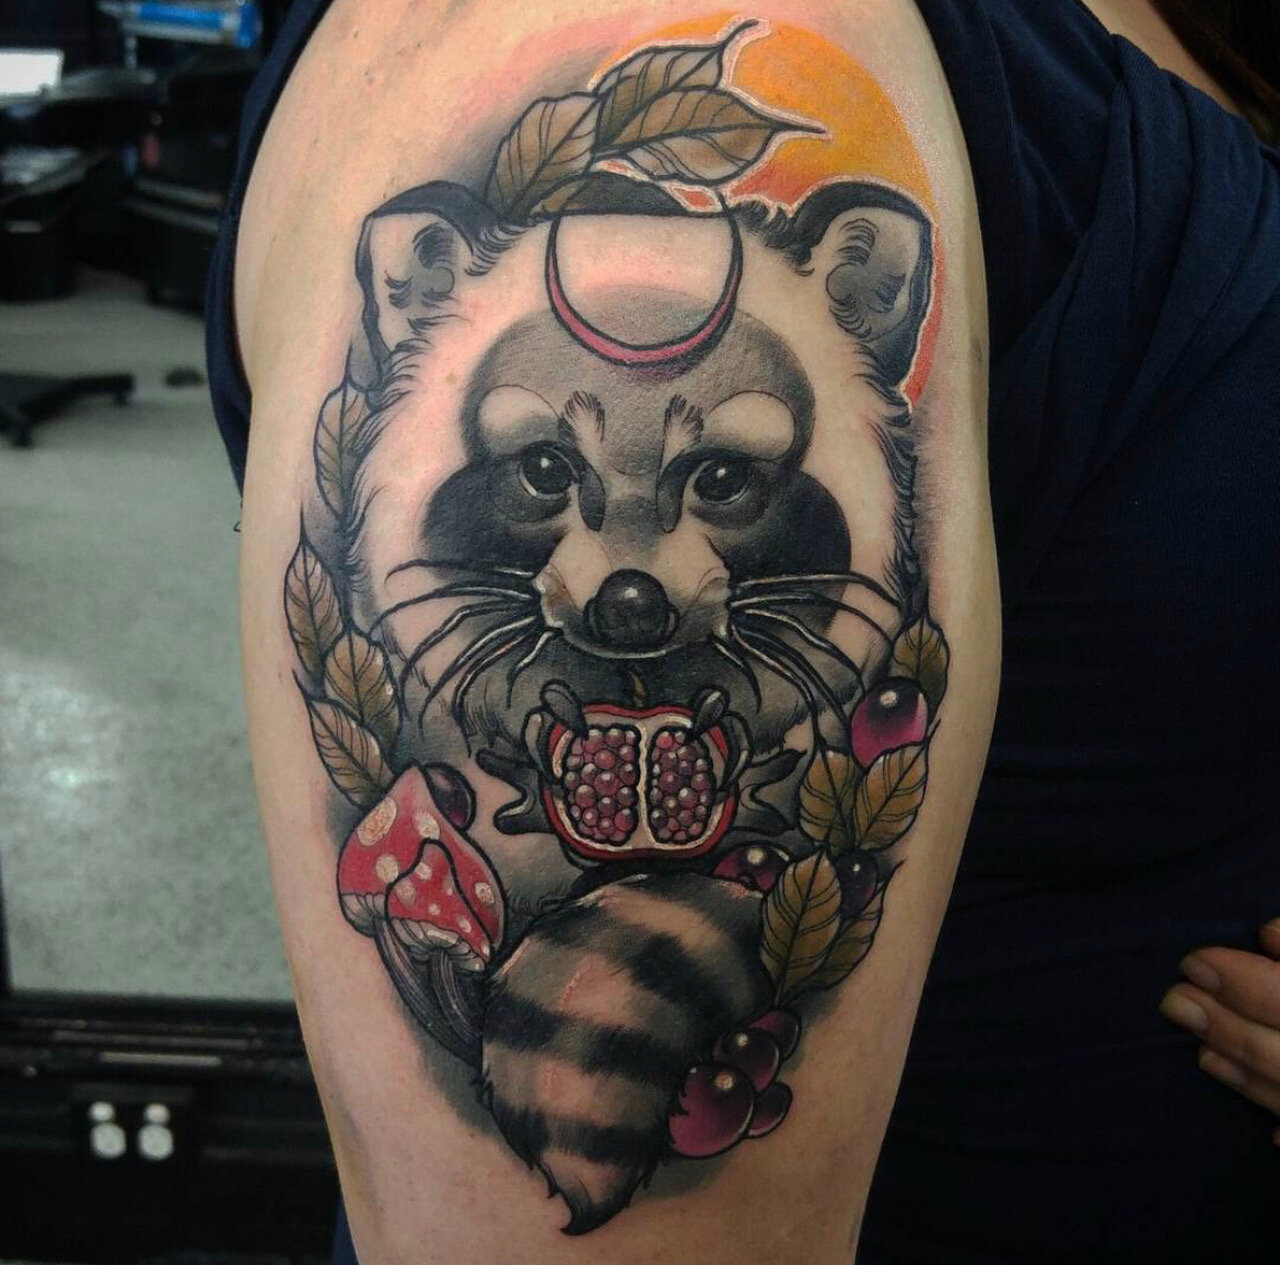 Raccoon healed I did one month ago at London Tattoo